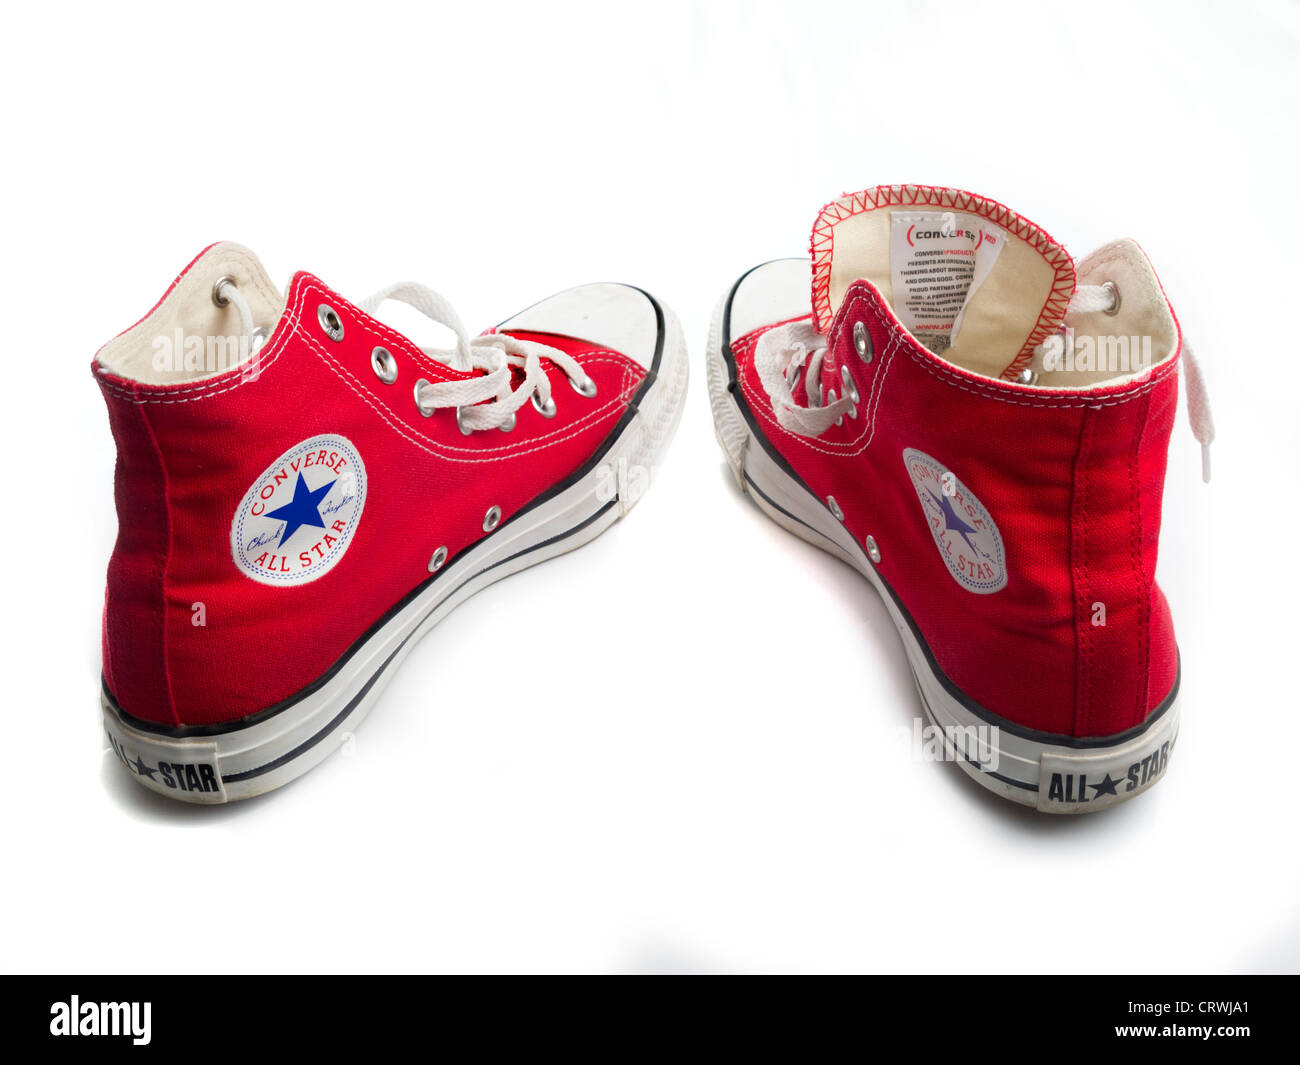 Converse Sneakers Red High Resolution Stock Photography and Images - Alamy